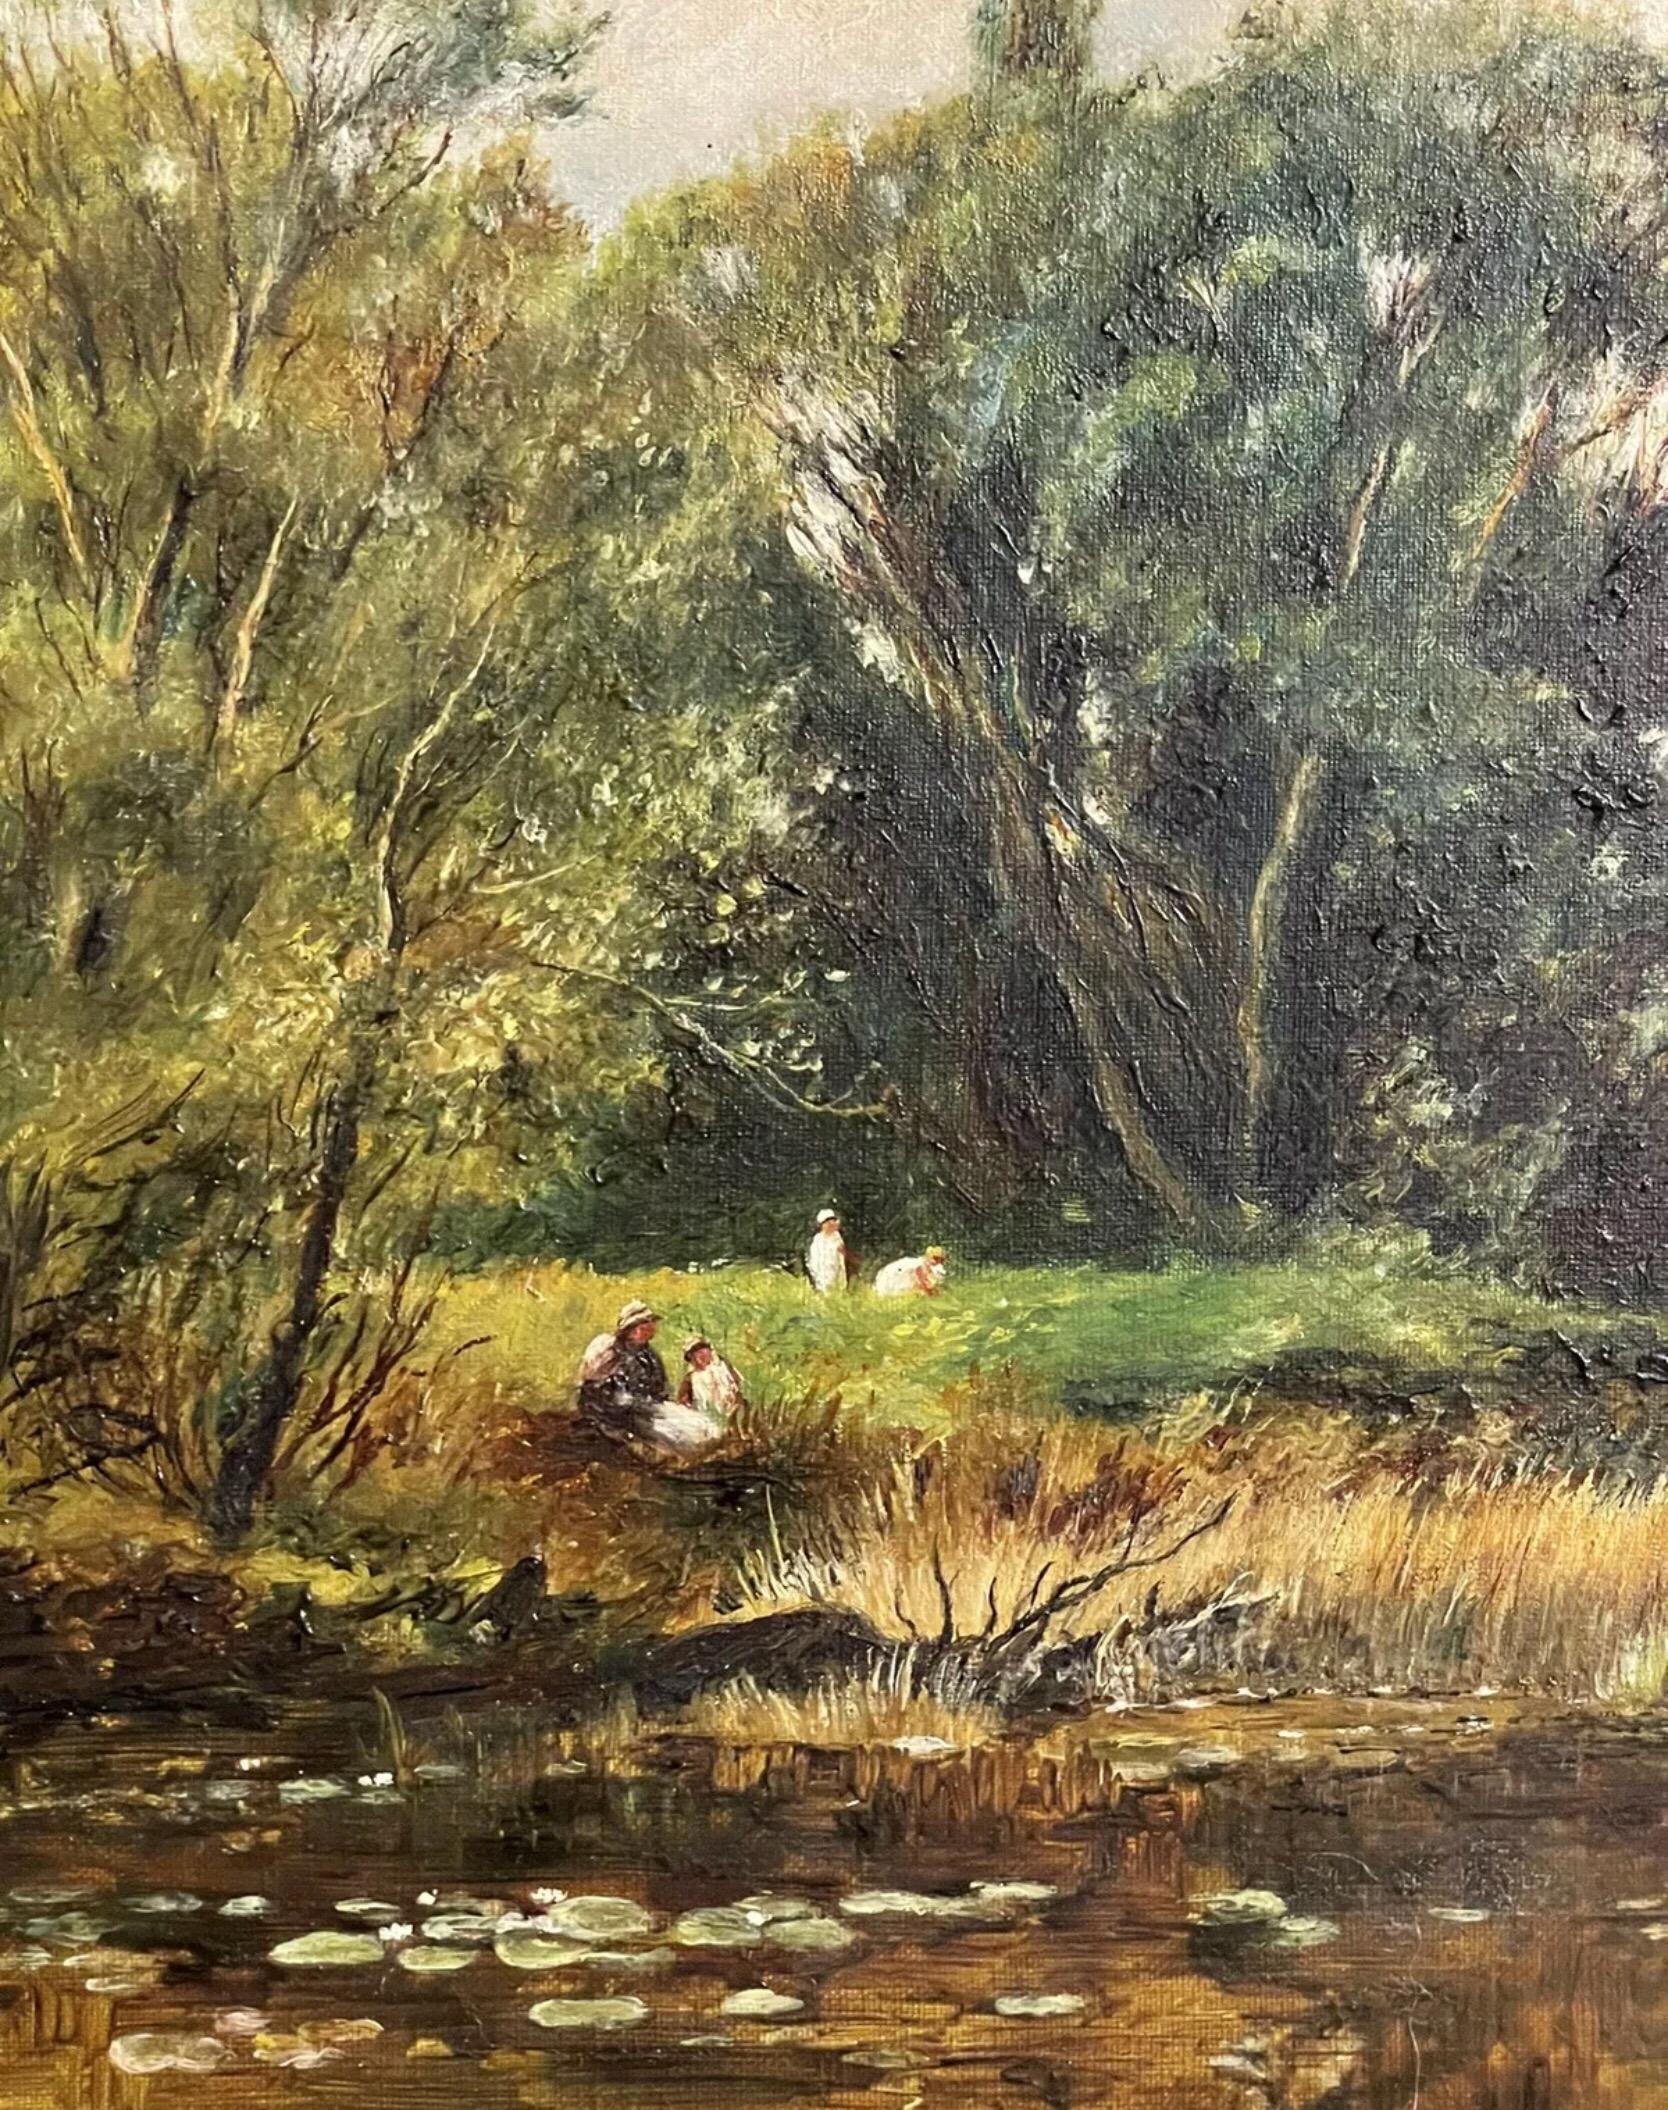 Artist/ School: English School, signed and dated 1903 lower corner. 

Title: The Winding River

Medium: oil painting on canvas, unframed.

Size:  painting: 18 x 24 inches

Provenance: private collection, UK

Condition: The painting is in good and